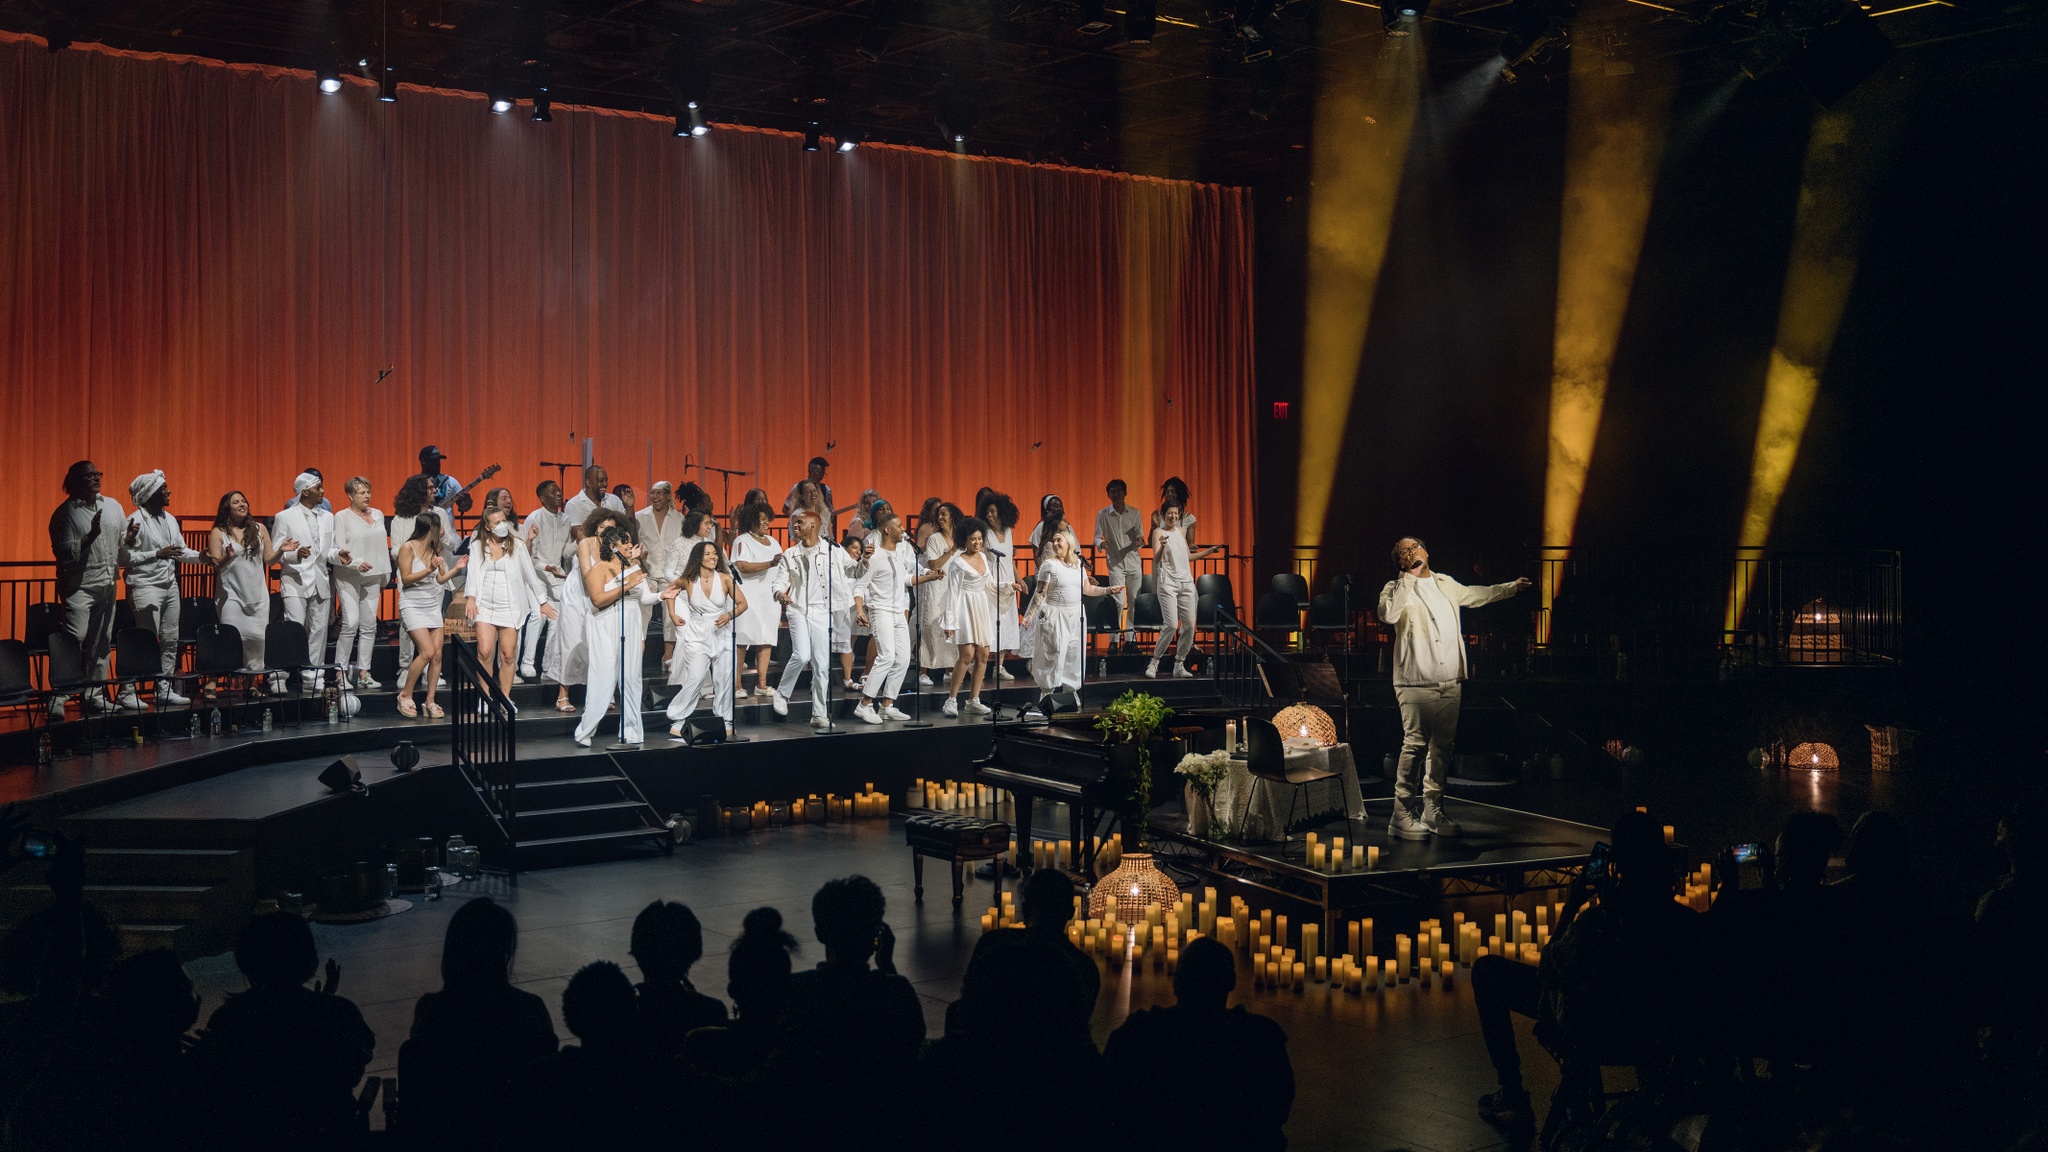 Troy Anthony, a Black man dressed in white, stands on a small stage in a black box theater with a choir on risers behind him. Troy stretches out his hands and the choir members dance. They are also dressed all in white. Around Troy are numerous lit candles. Behind the choir, a curtain is lit in deep umber tones.